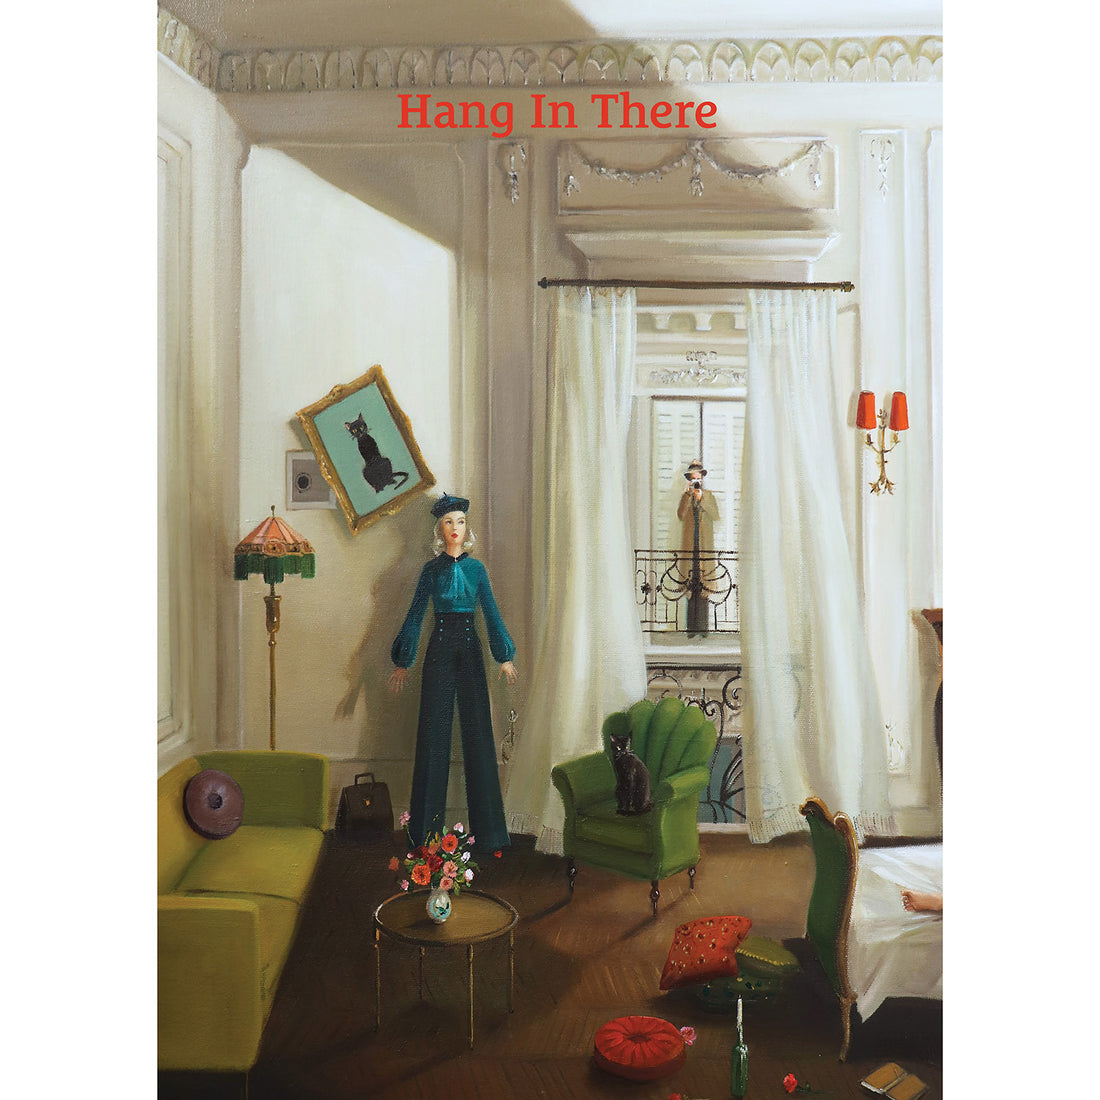 A painterly illustration of the inside of a vintage-style room with an open window. Inside the room, a woman in a teal outfit and beret stands near the window, so as not to be seen by the spy in a tan coat and hat holding a camera across from the open window. Inside the room are mysterious details like a safe behind a painting, a briefcase, and a single foot visible on  the bed. The card reads &quot;Hang In There&quot; in red across the top. 